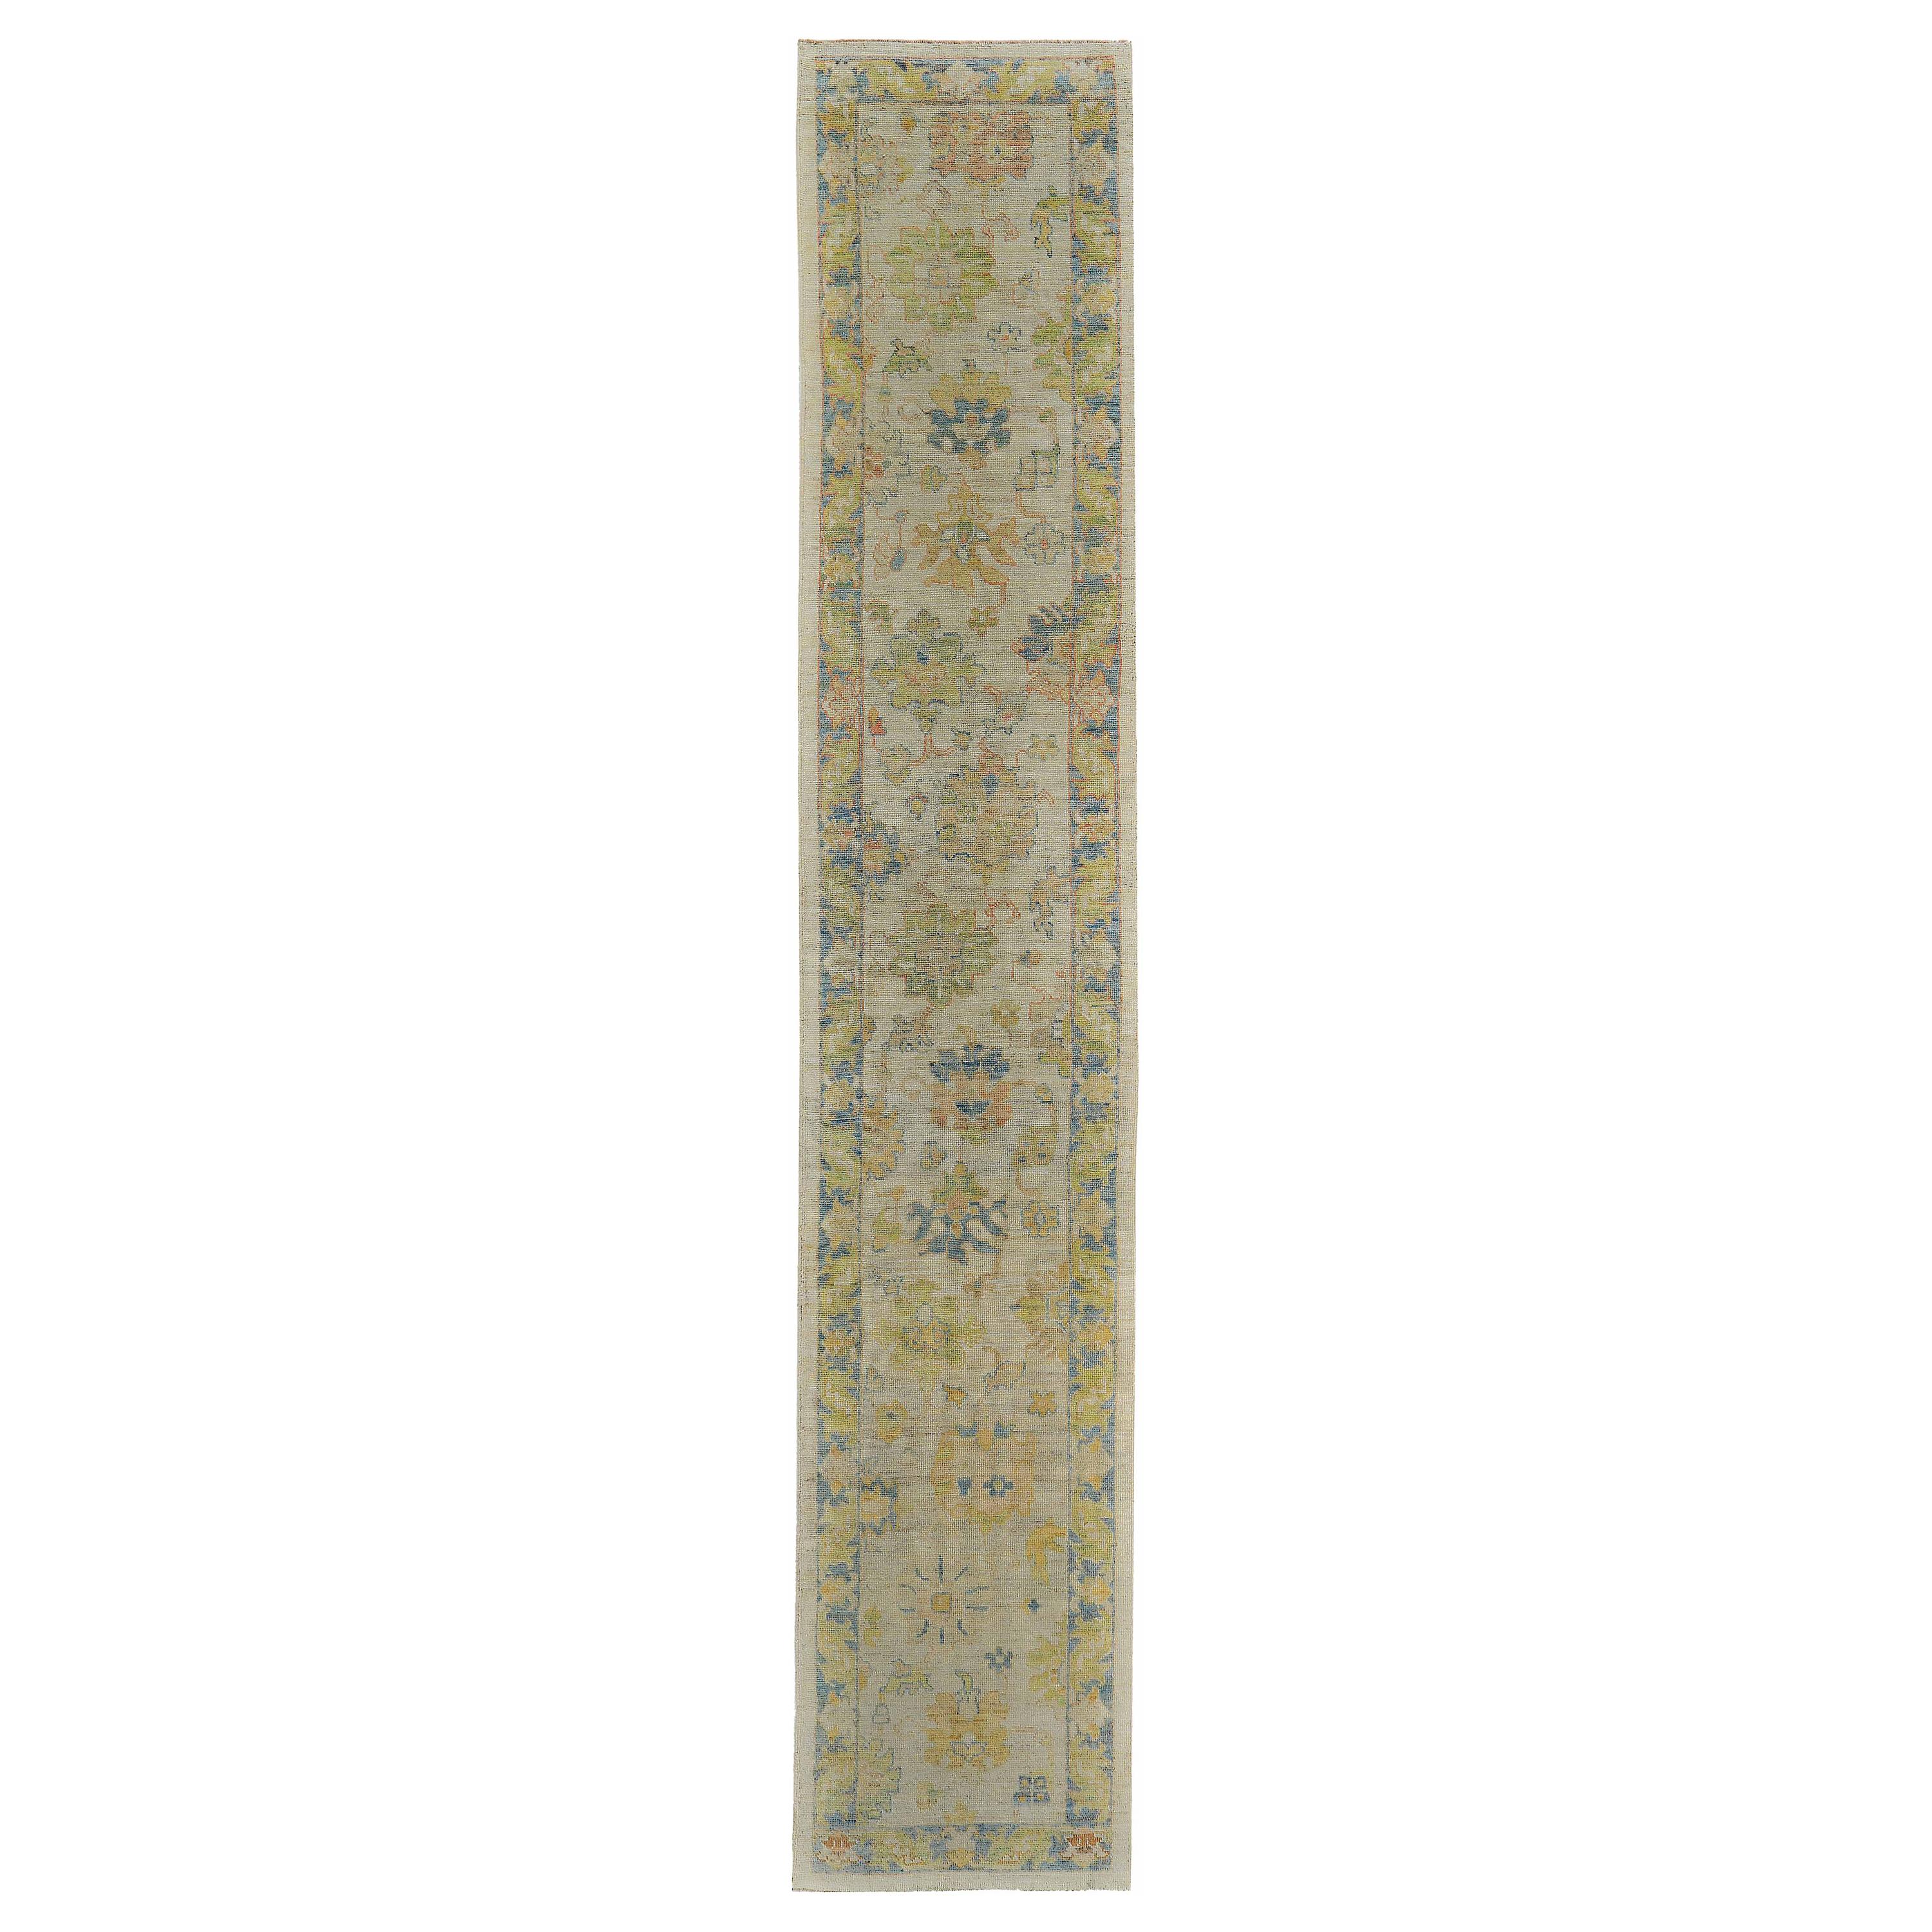 Turkish Oushak Runner Rug with Blue and Green Floral Details on Ivory Field For Sale